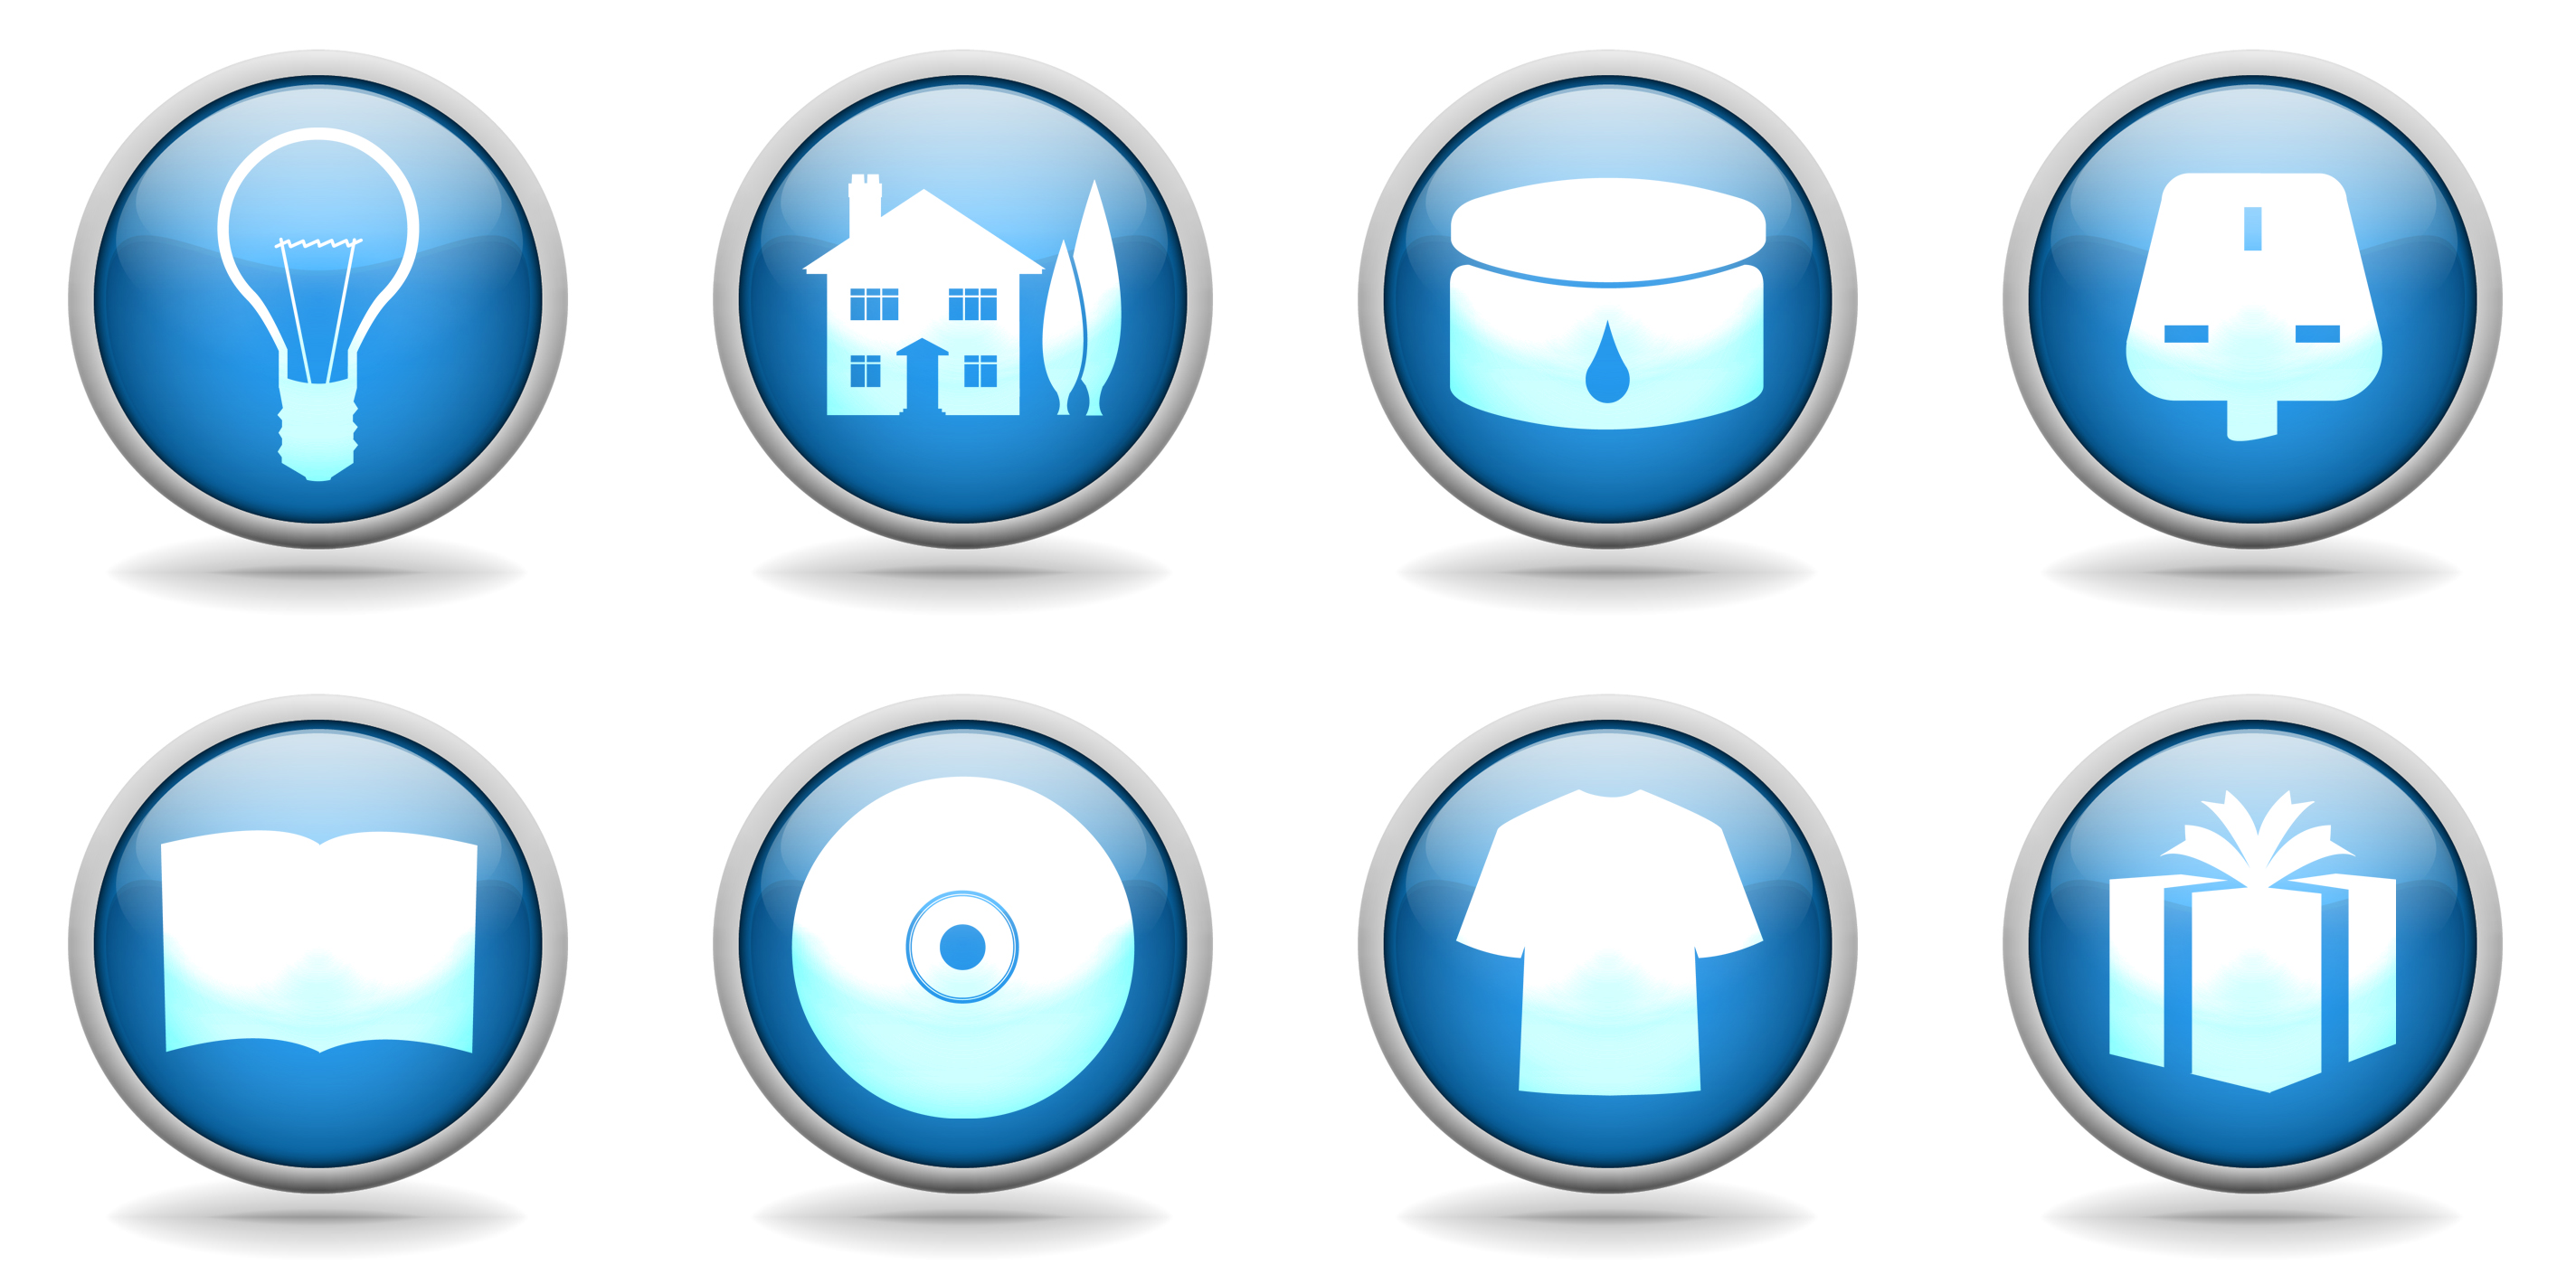 Free home icons to download - Scottish Borders Website Design Blog